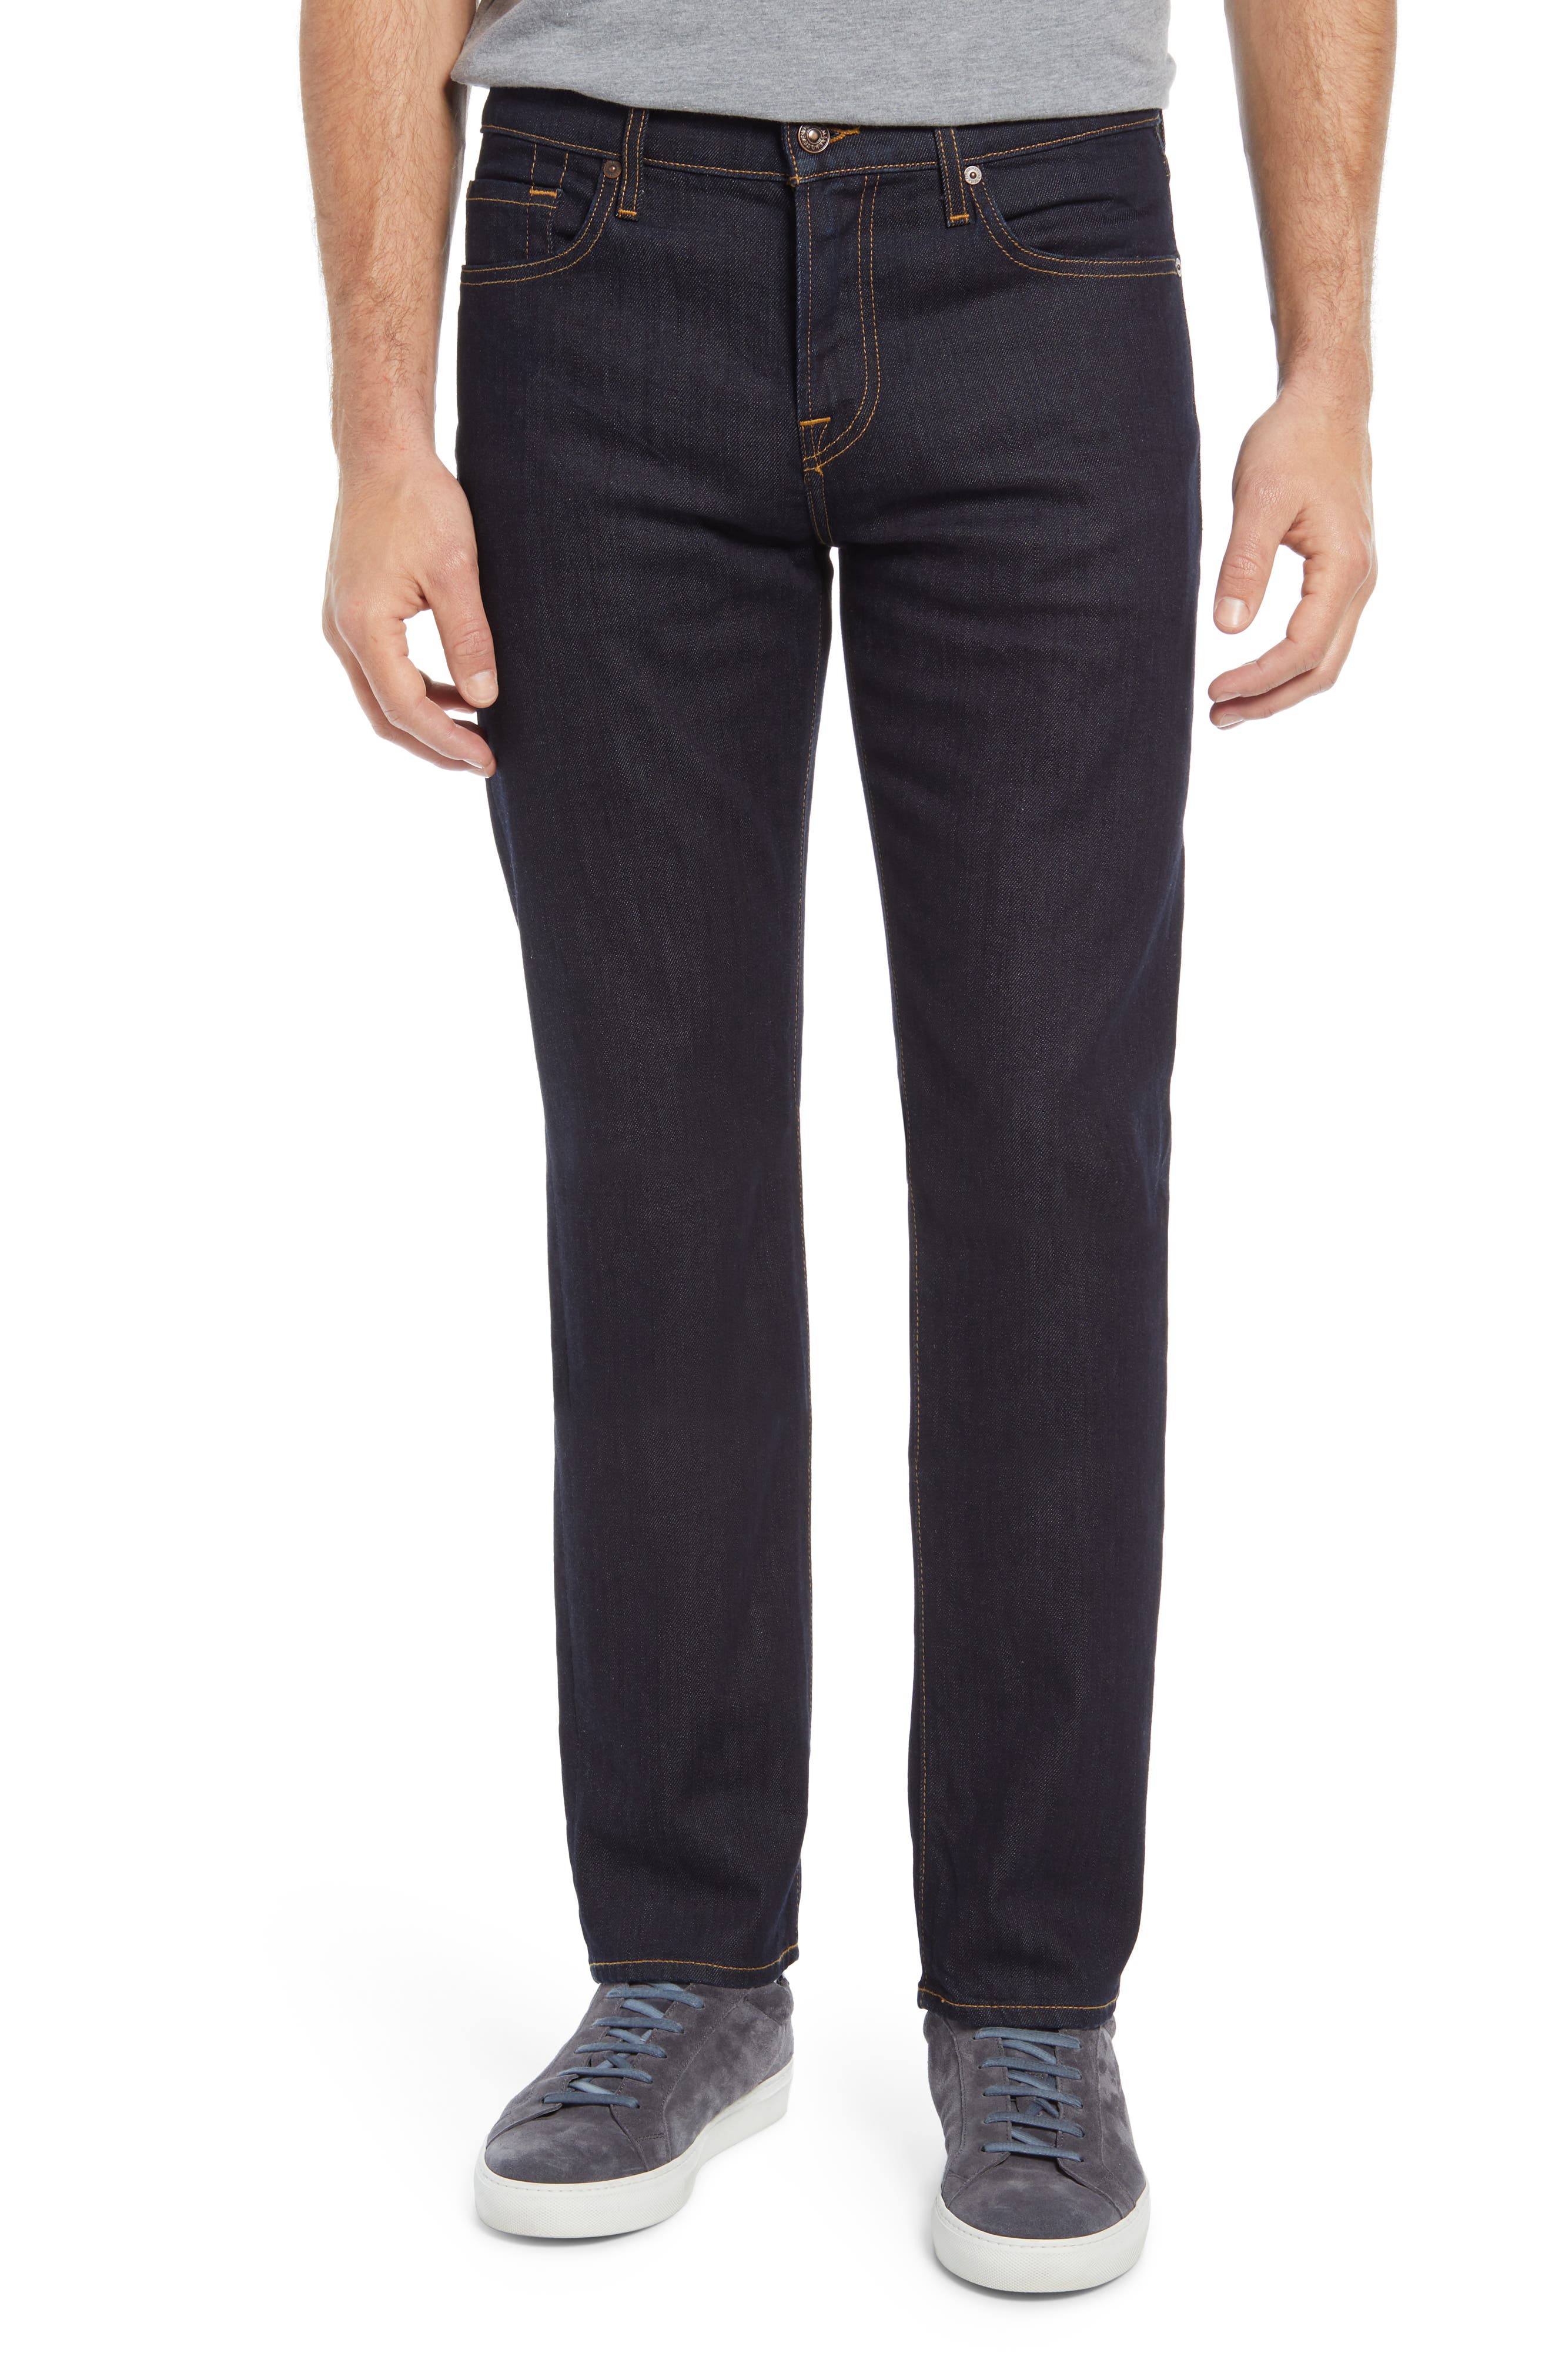 7 for all mankind usa online store